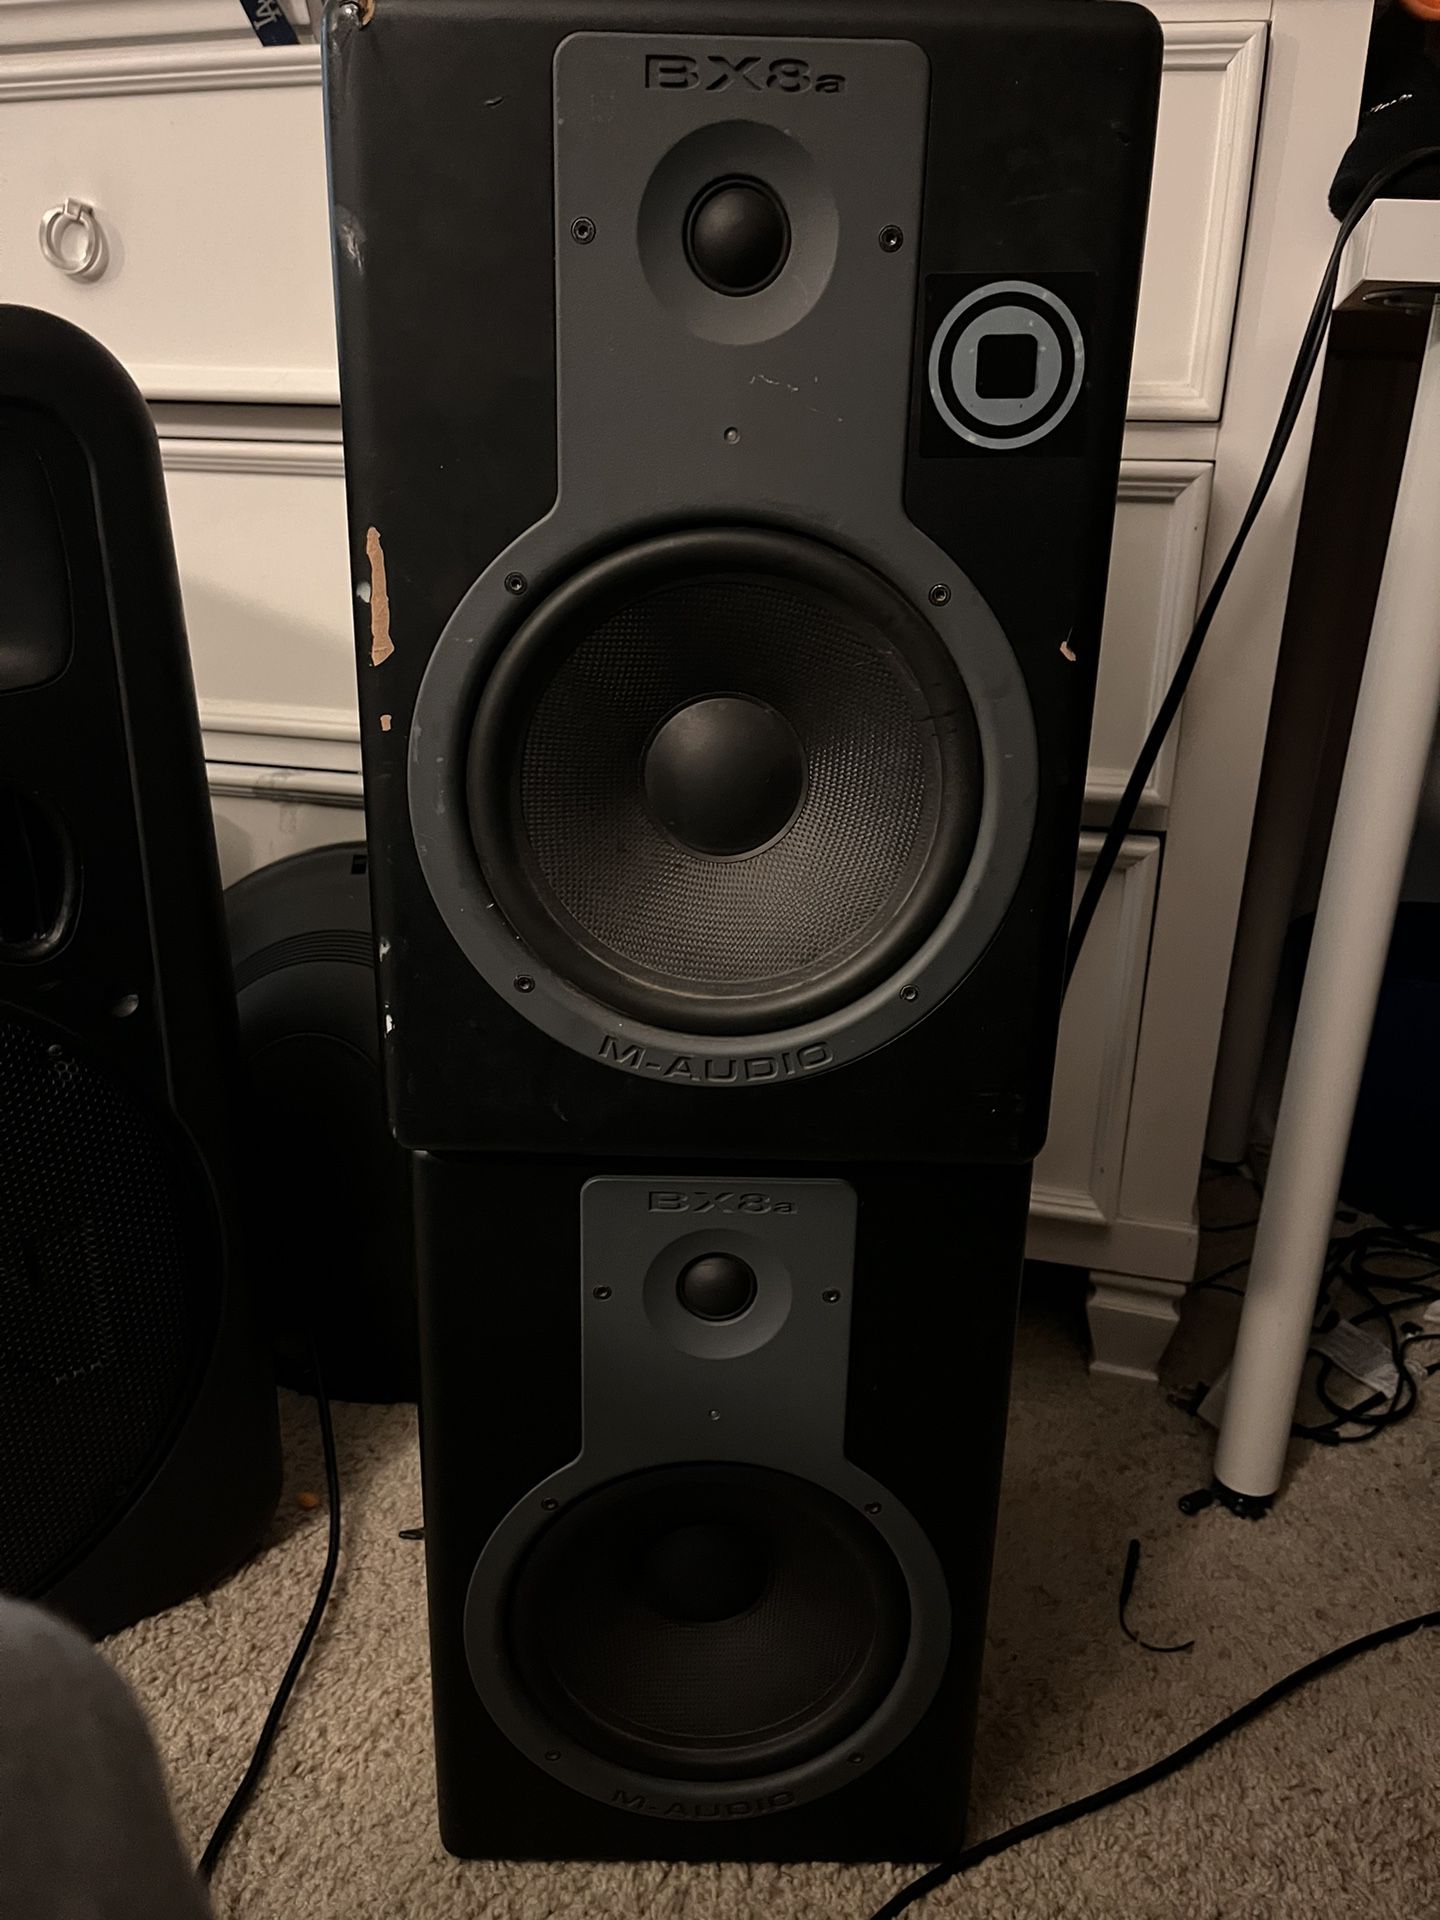 M Audio Bx8a Monitor Speakers 